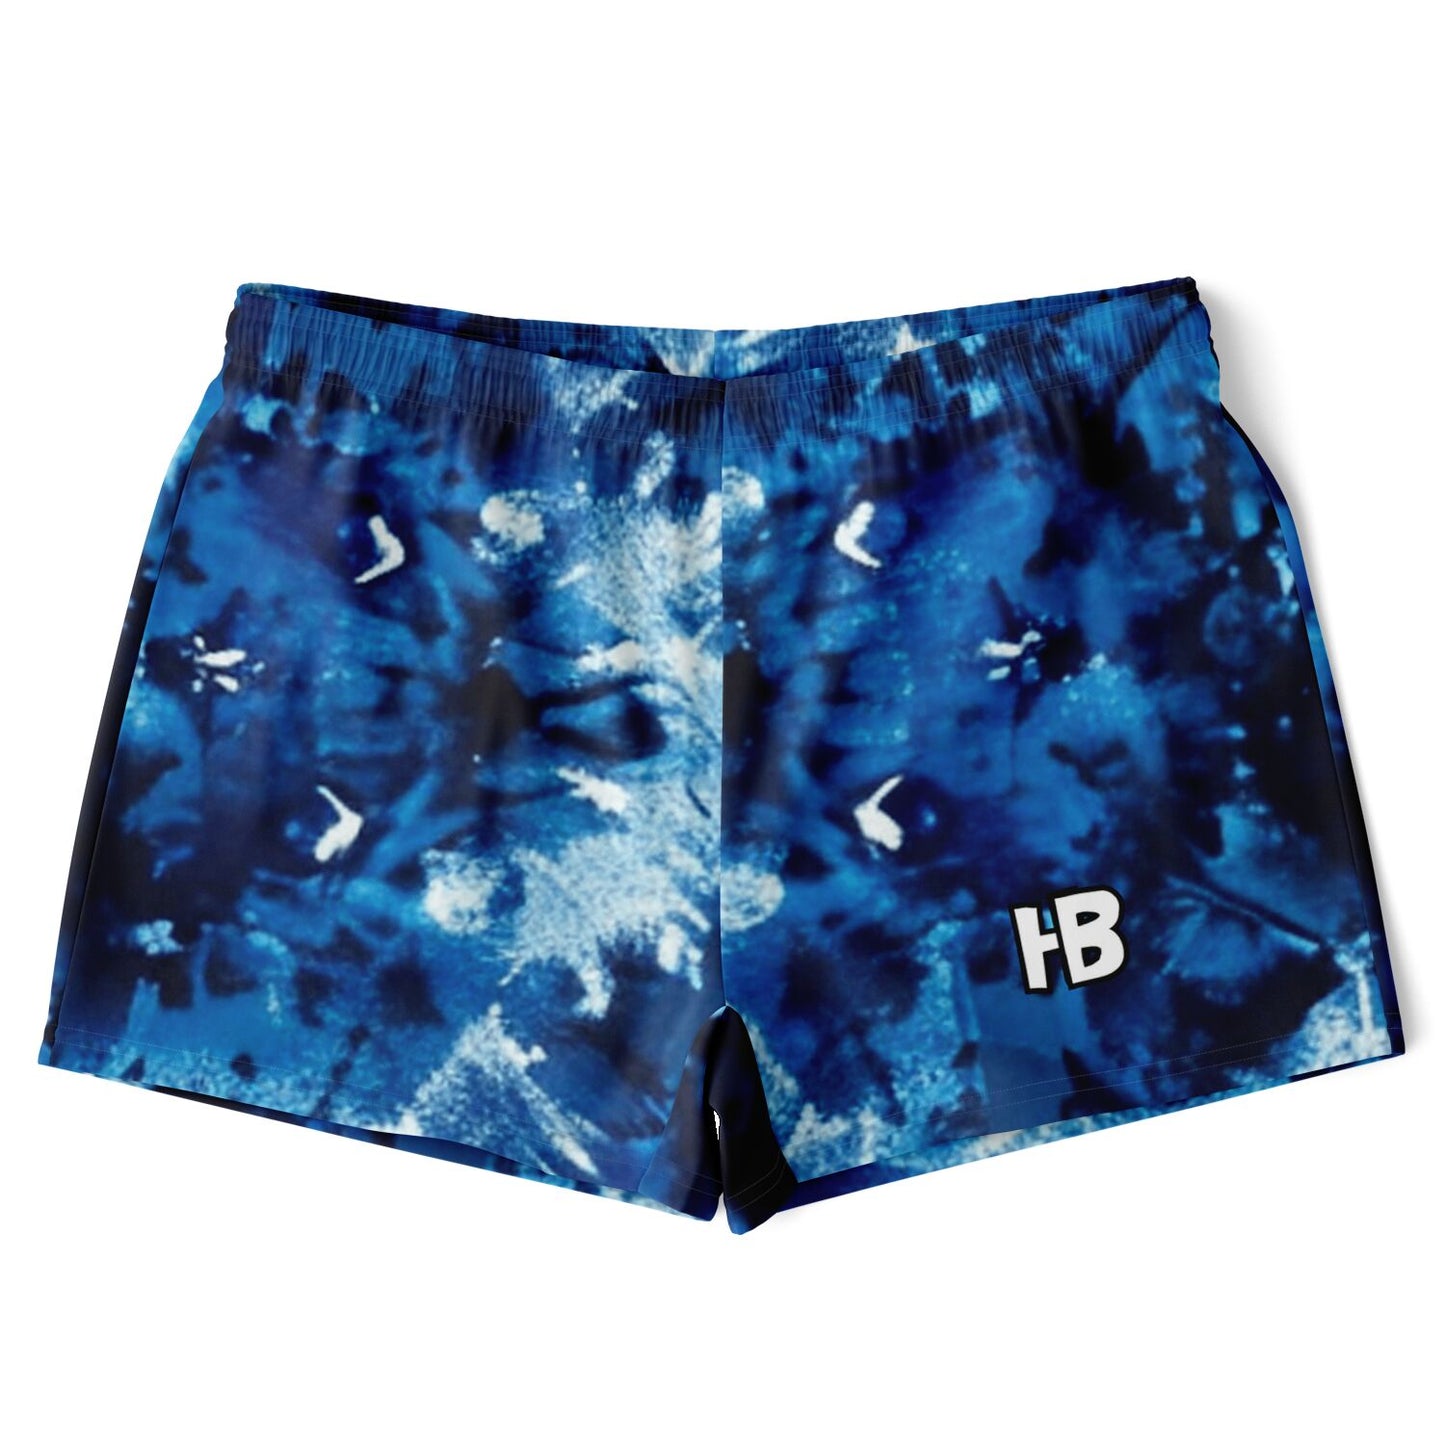 OcEAnIc TiE dYe mEnS aNd WoMEns SoCcEr ShOrTs